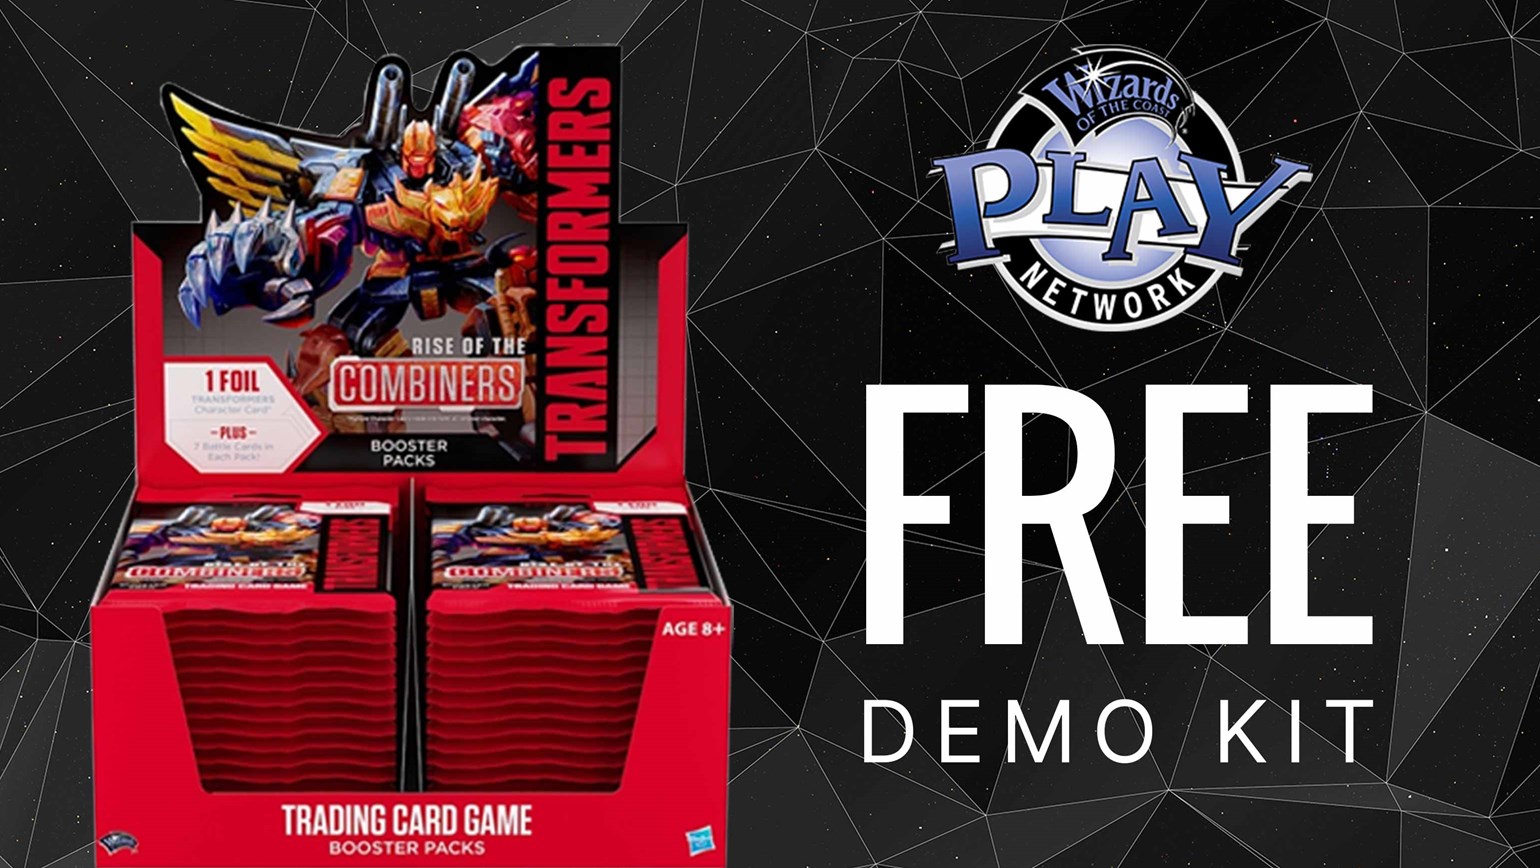 Free Transformers TCG Demo Kits Available Through the Wizards Play Network